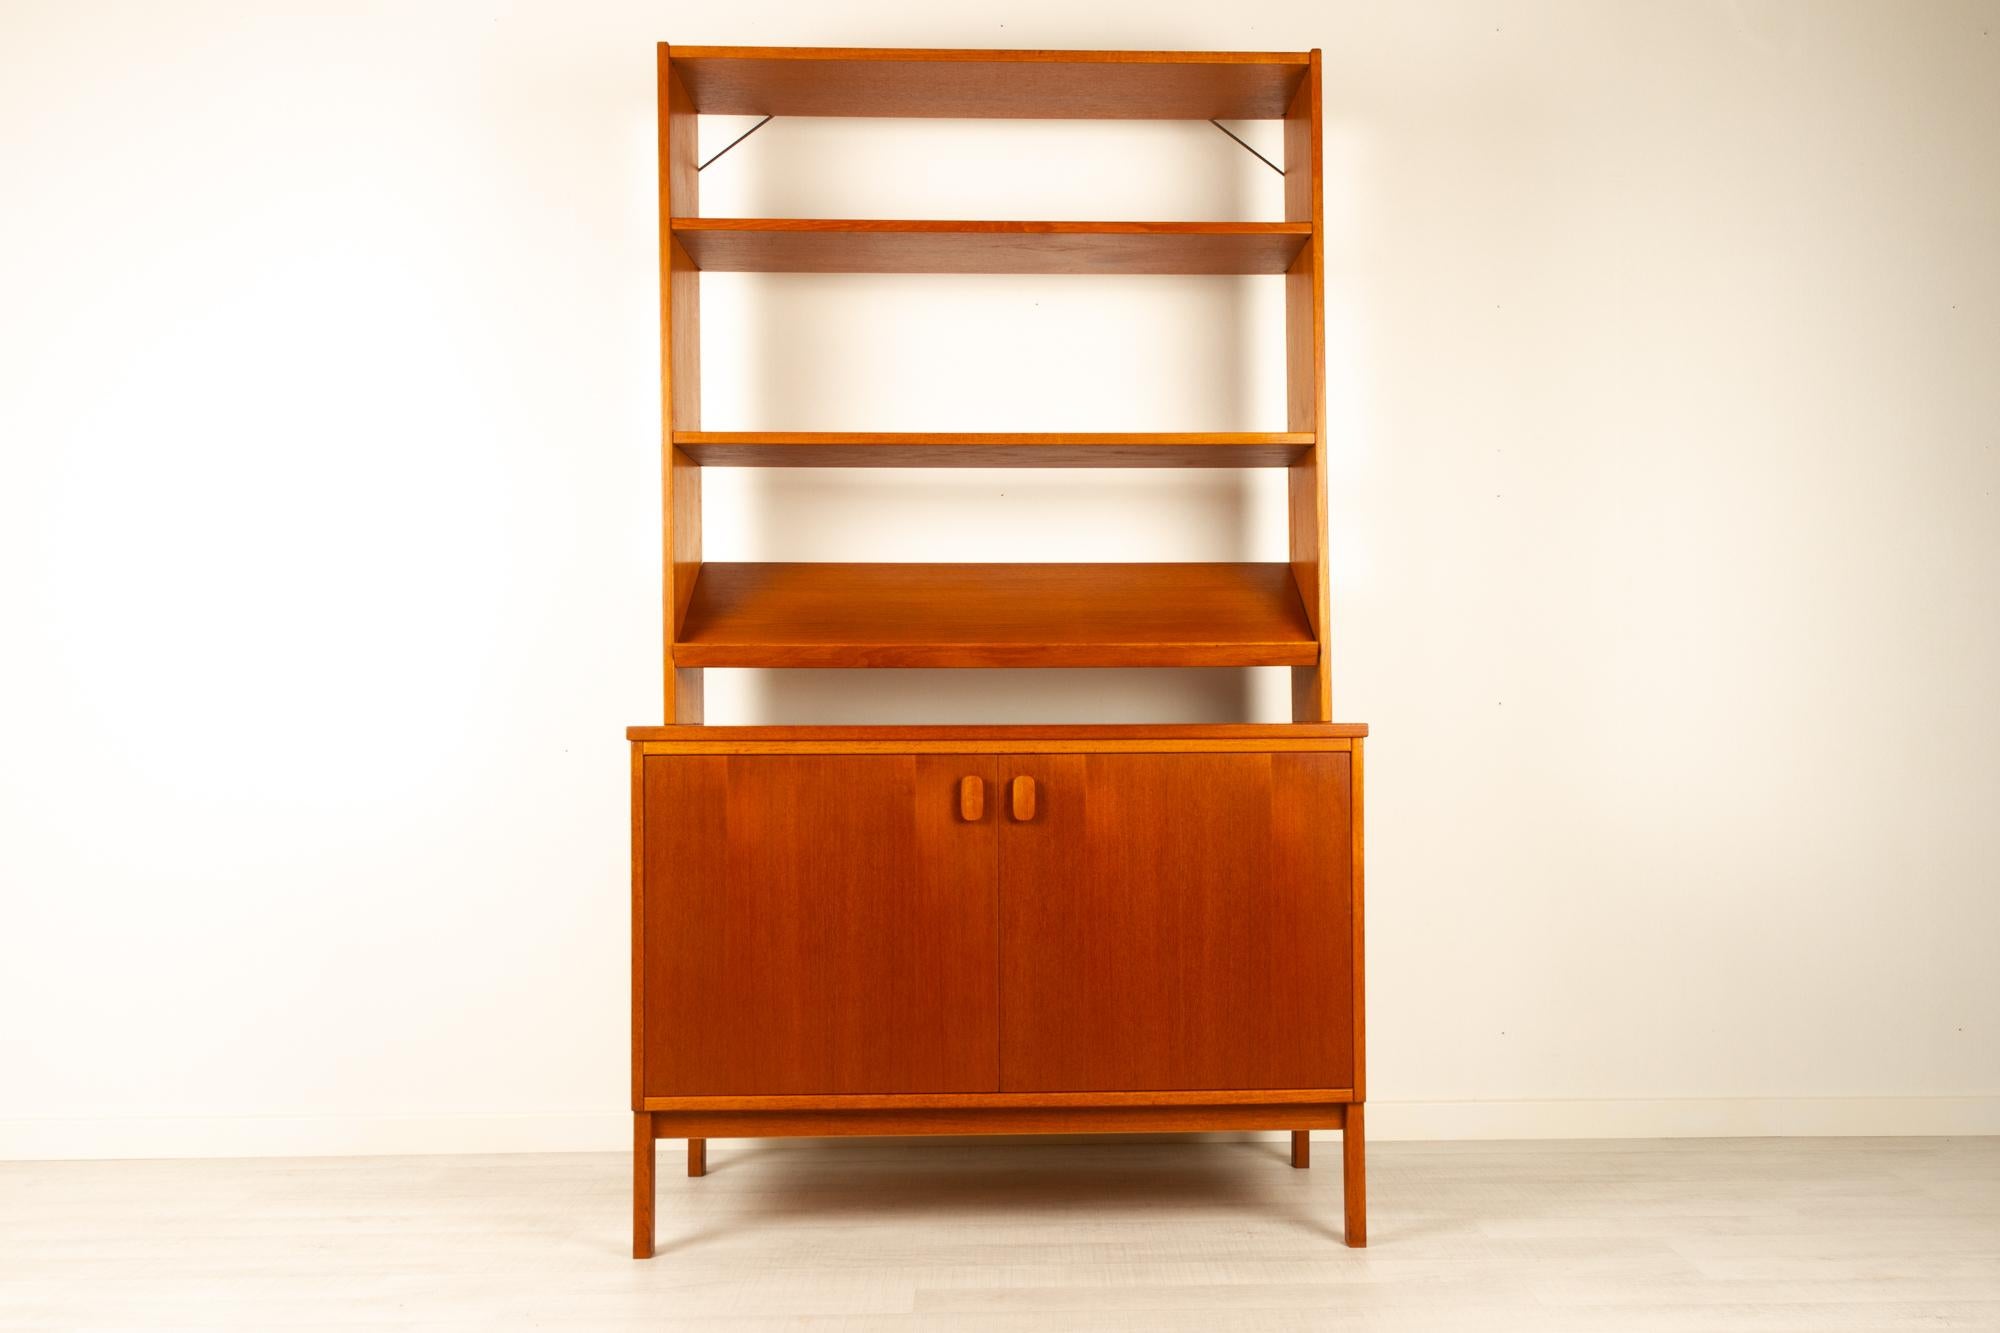 Vintage Scandinavian teak bookcase by Ulferts, 1960s
Mid-Century Modern wall unit with open shelves, made in Sweden. Four square legs in solid teak. Top section with slanted magazine shelf and open shelves. Bottom section with large cabinet with